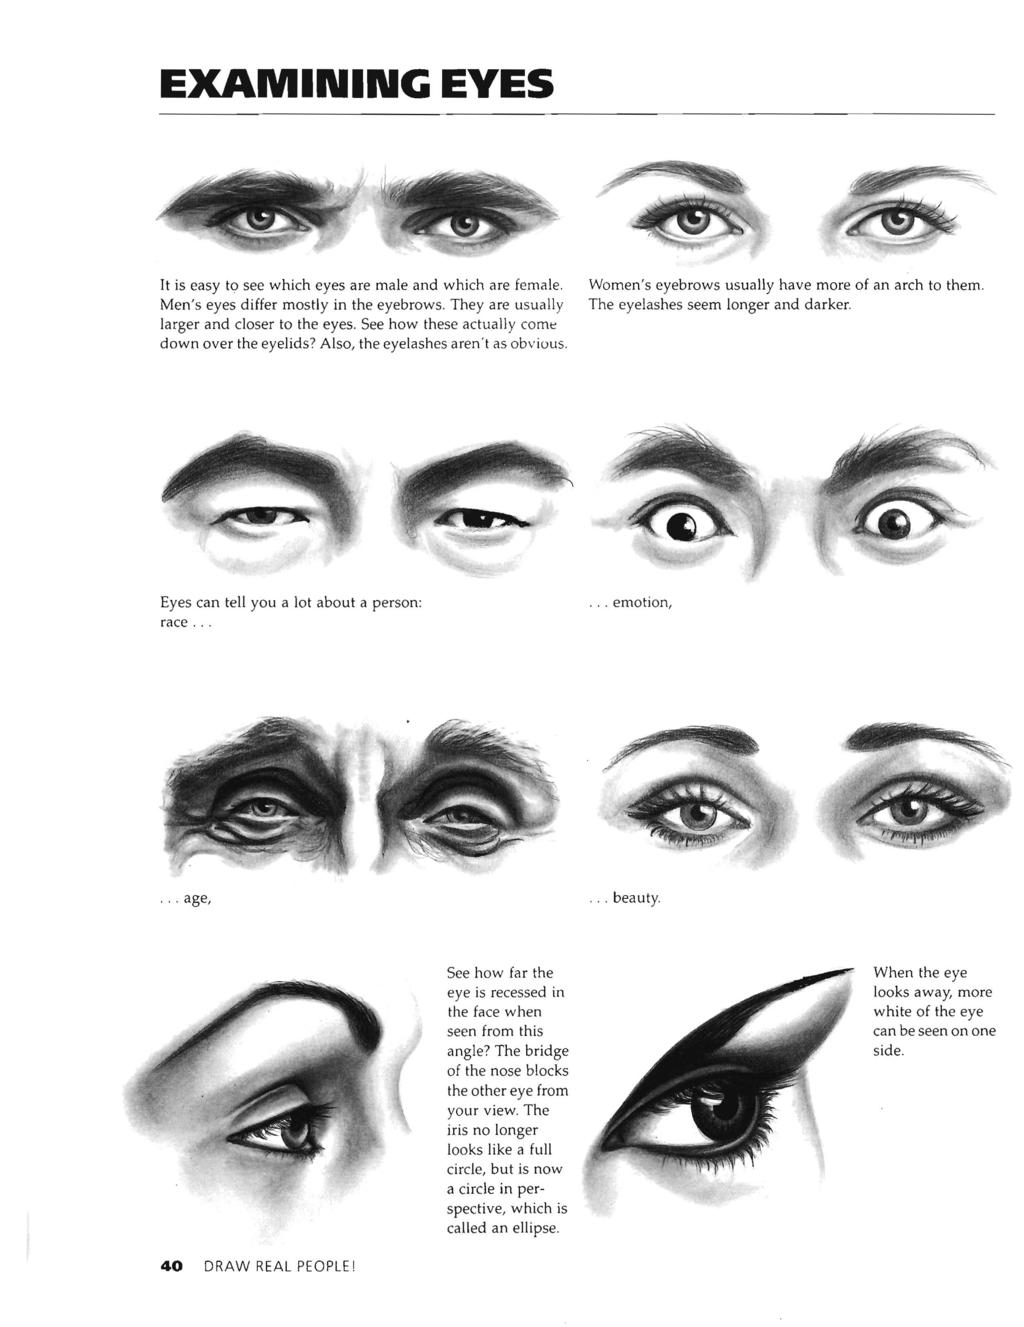 EXAMINING EYES It is easy to see which eyes are male and which are female. Men's eyes differ mostly in the eyebrows. They are usually la rger and closer to the eyes.